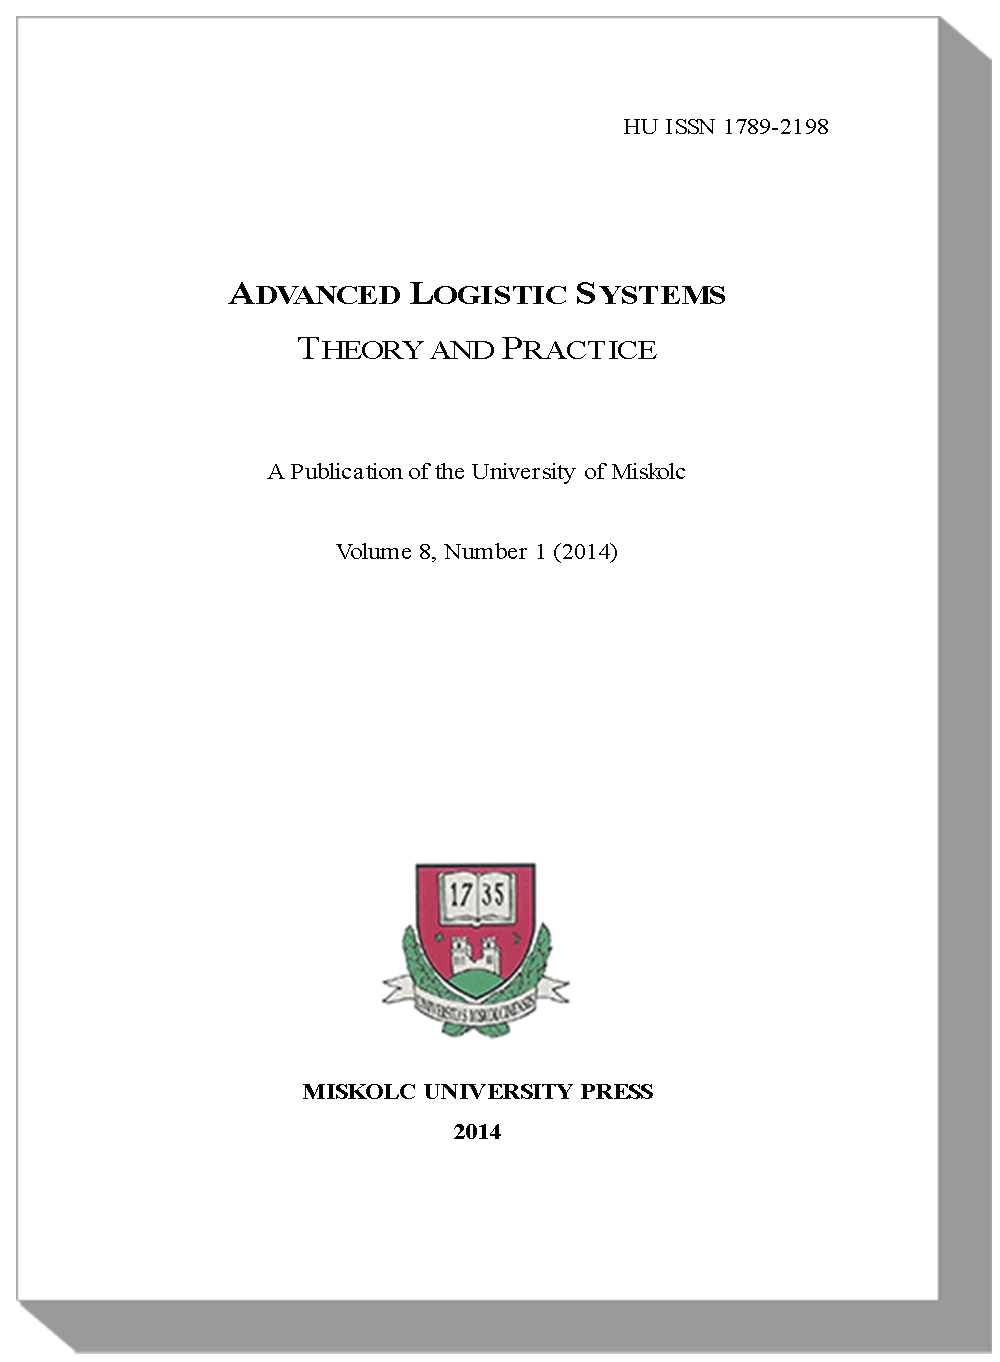 					View Vol. 8 No. 1 (2014): Advanced Logistic Systems - Theory and Practice
				